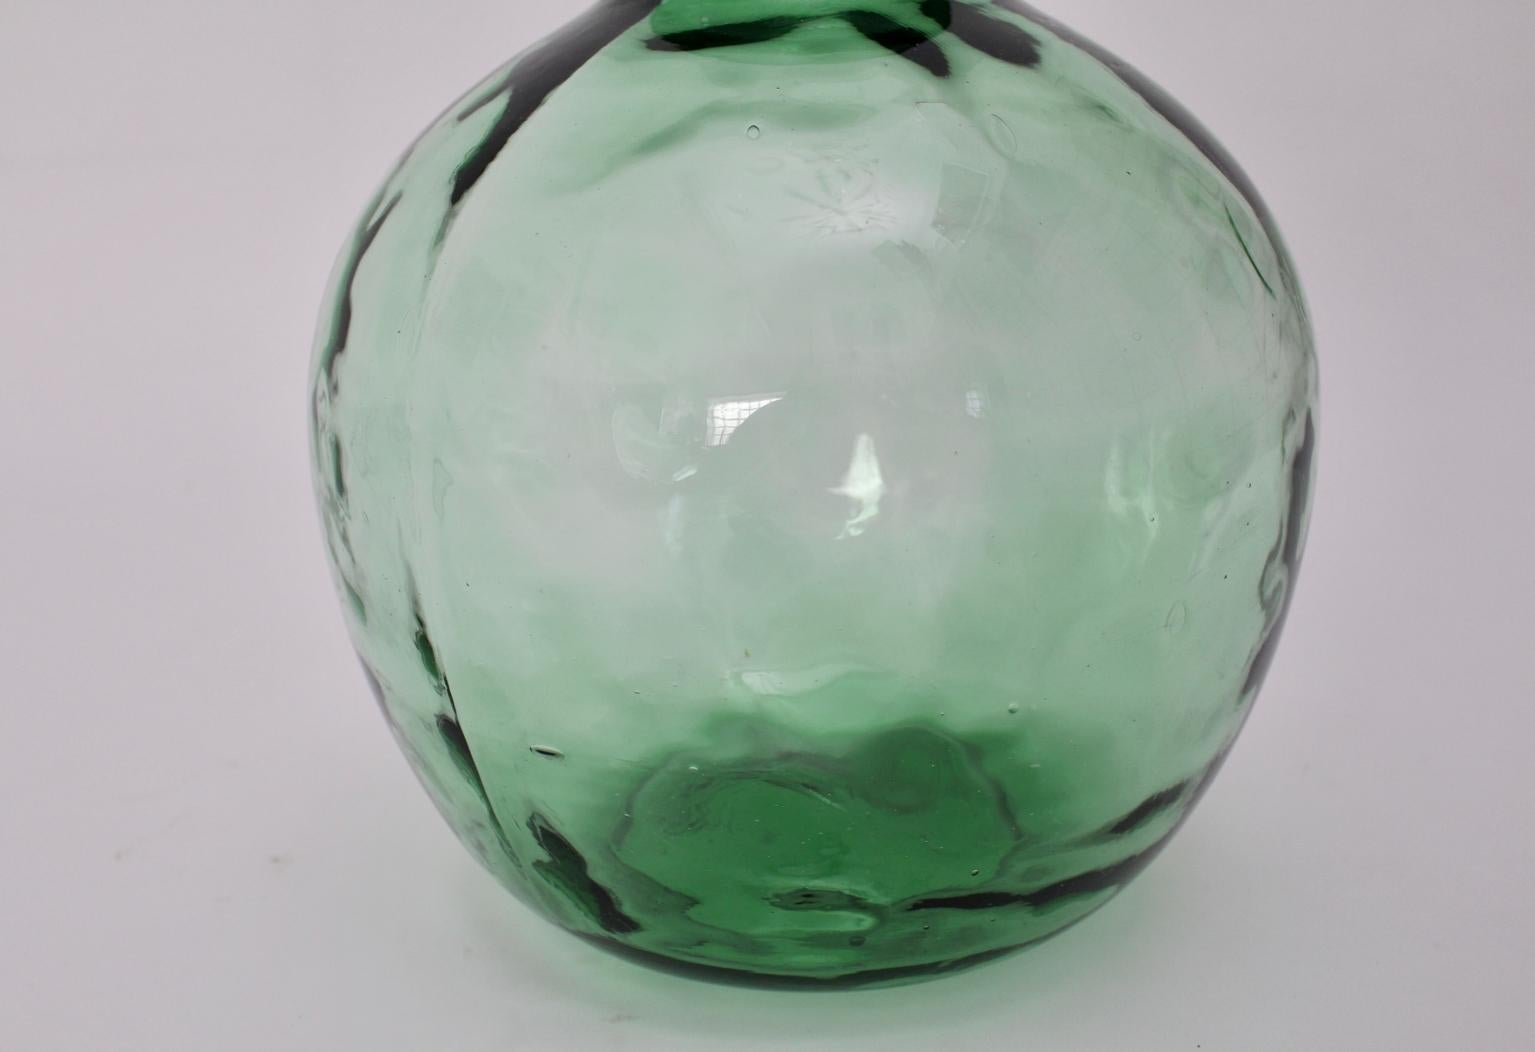 This presented green handblown very decorative glass bottle shows a 9 cm bottle opening. Also the glass bottle features bubbles in the glass.
Marked with Viresa.
There are no spots or damages, so the green clear glass bottle is in best vintage